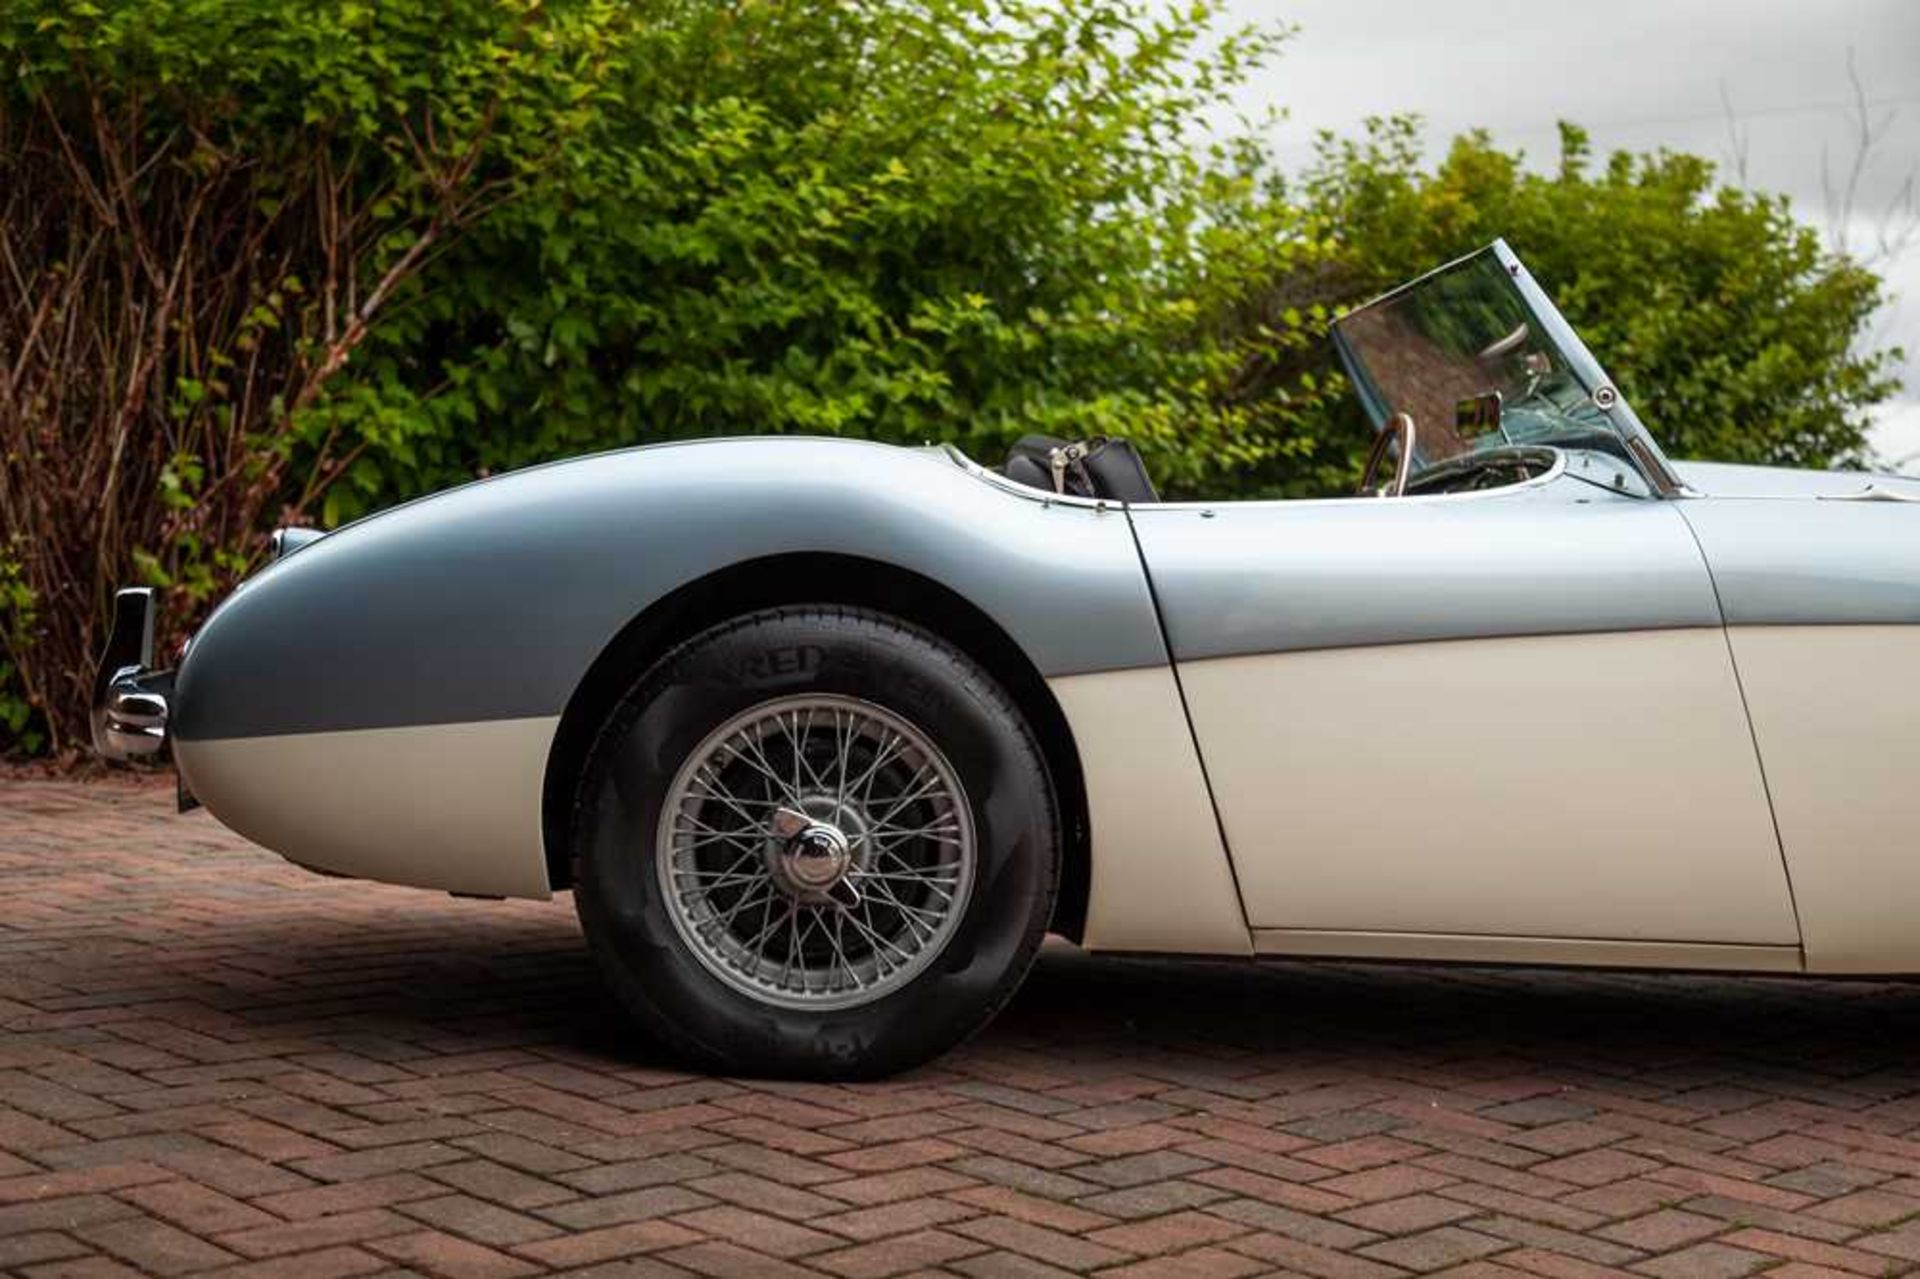 1955 Austin-Healey 100/4 Subtly Upgraded with 5-Speed Transmission and Front Disc Brakes - Image 53 of 54